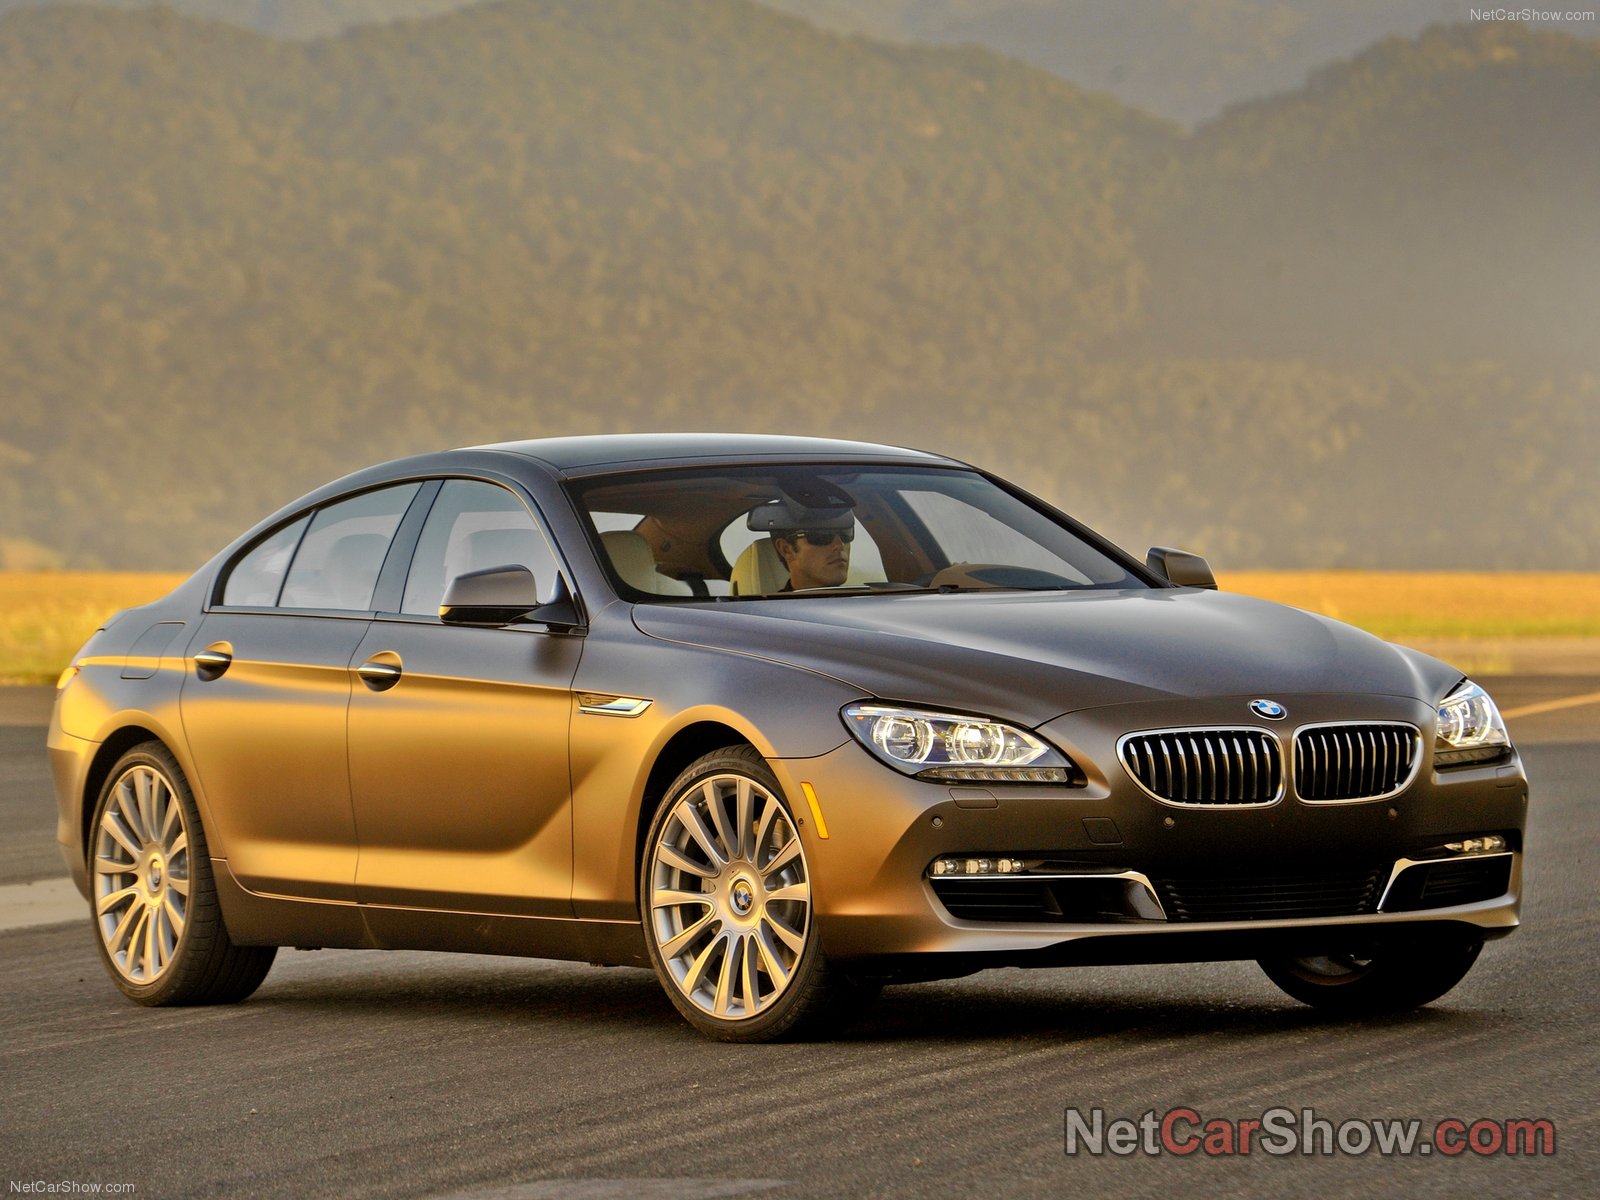 BMW 640i Gran Coupe photos PhotoGallery with 35 pics